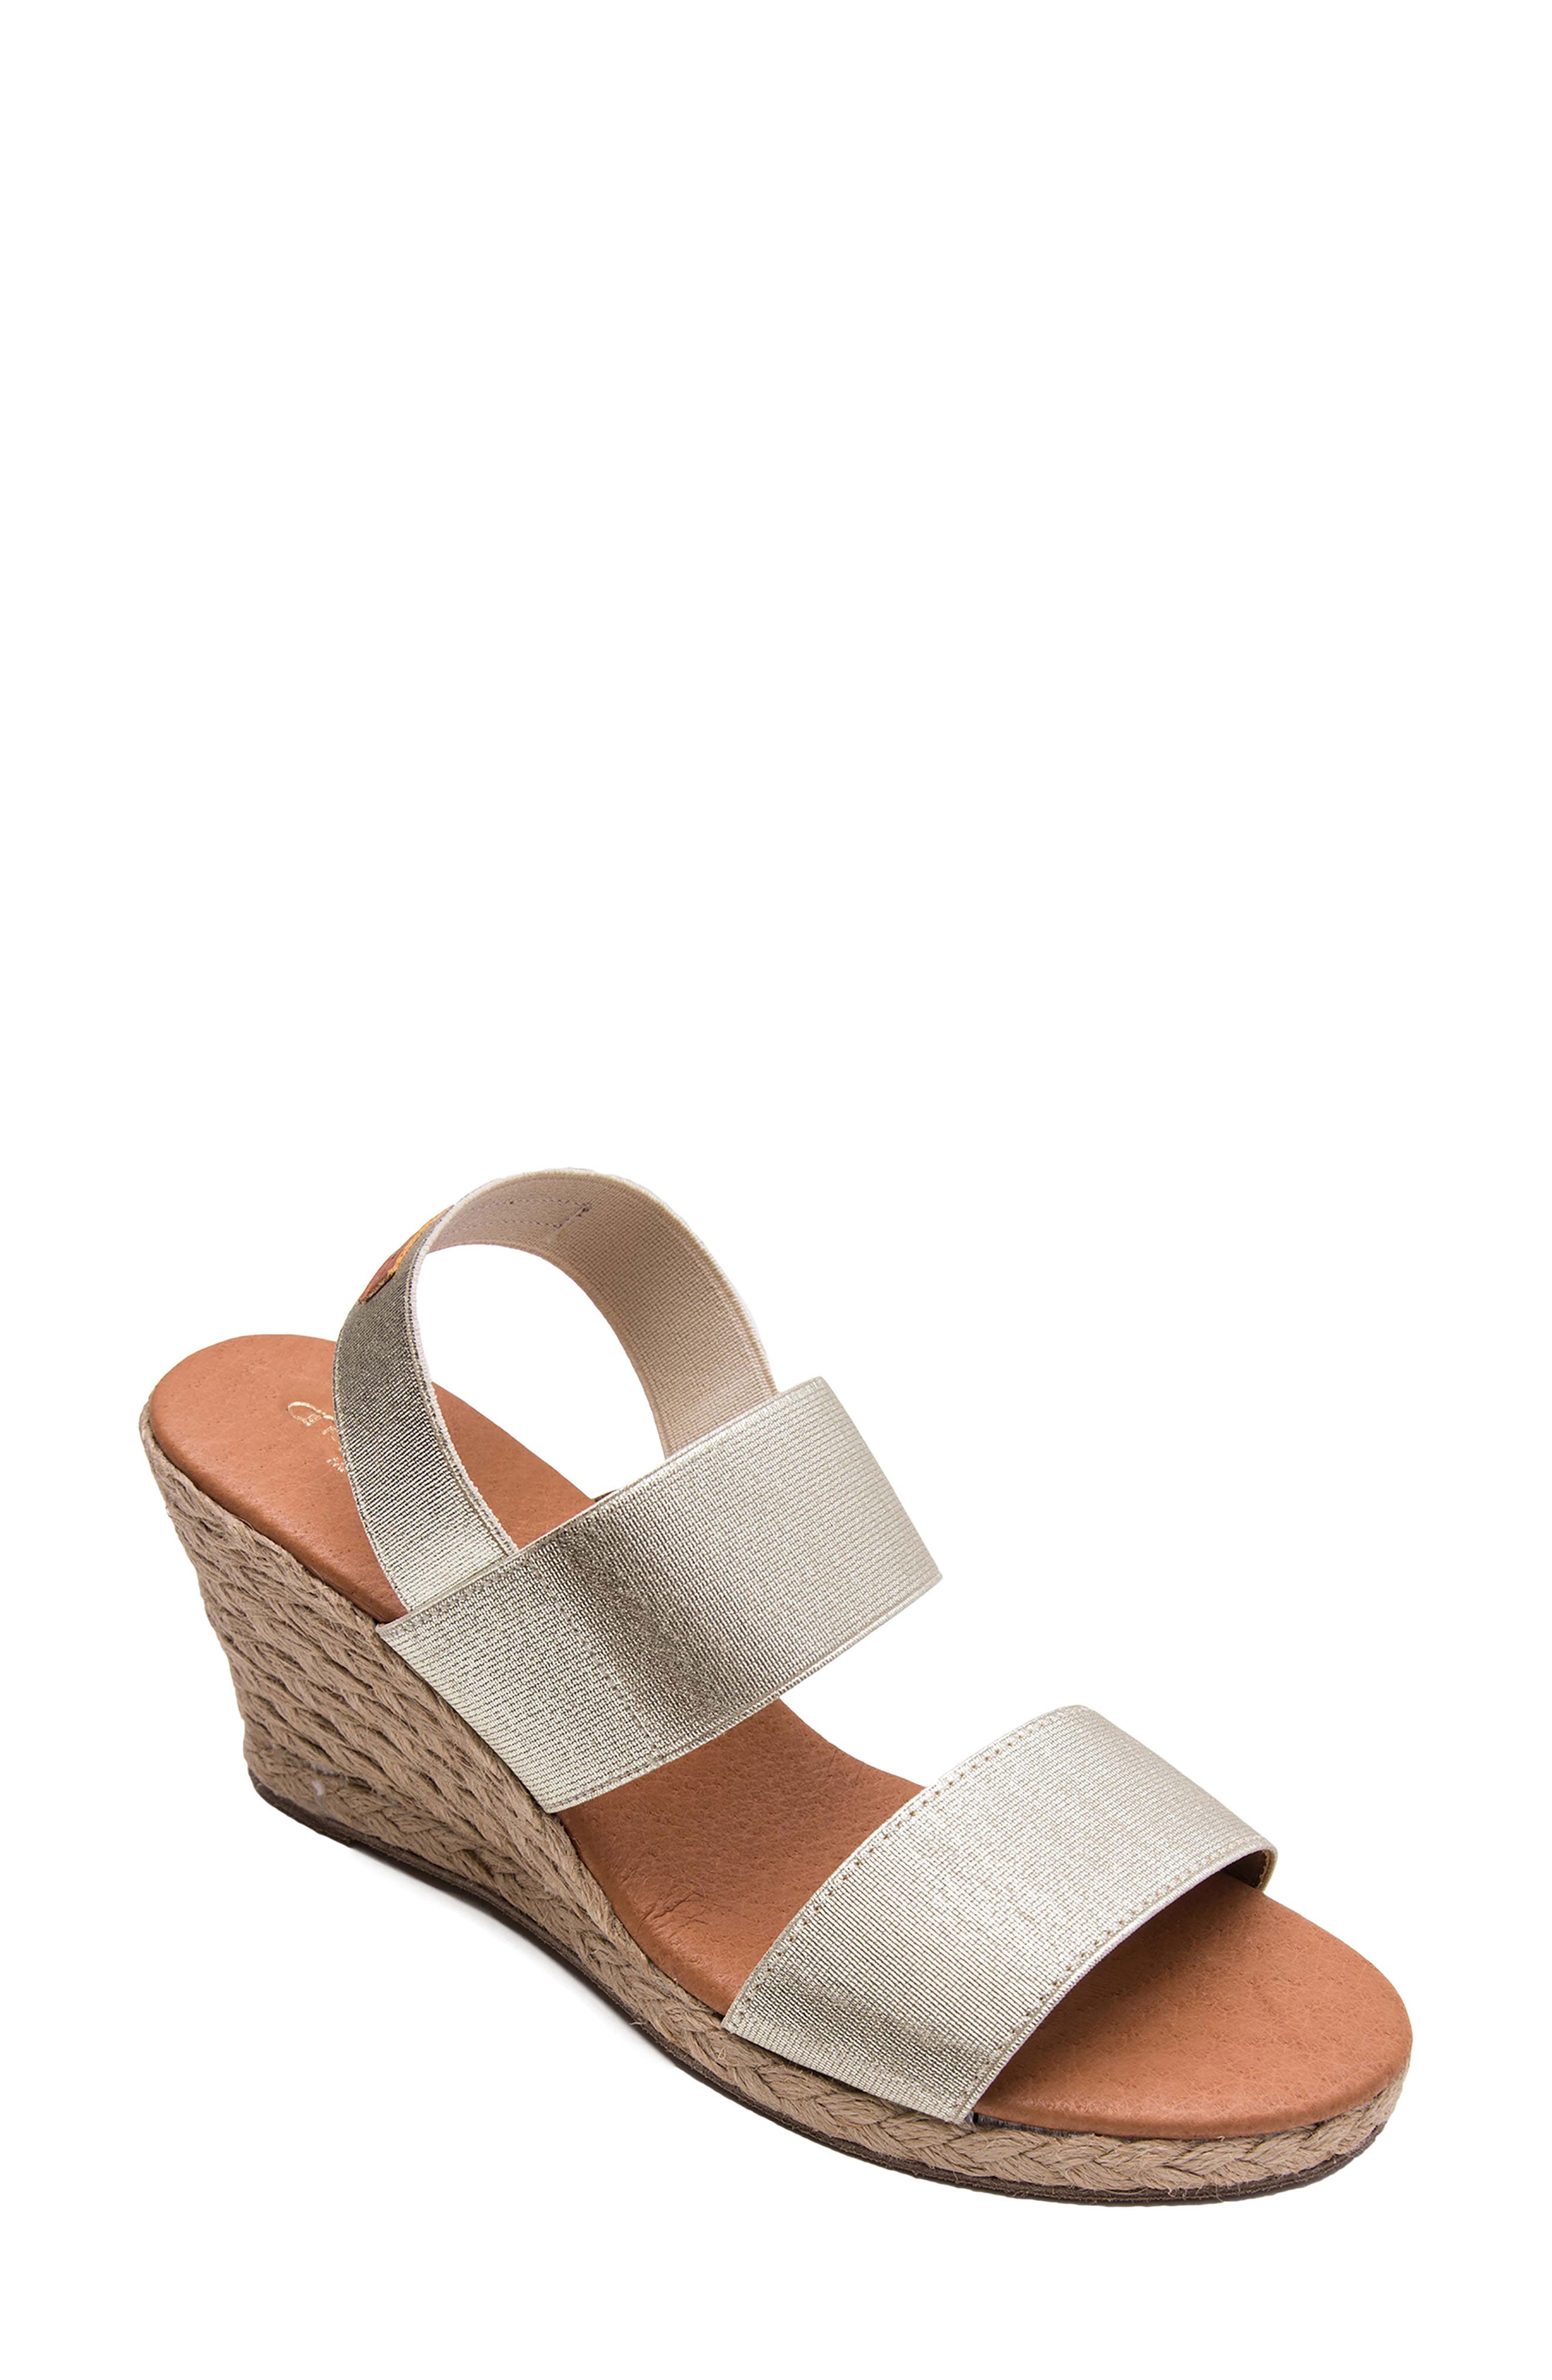 Andre Assous Allison Espadrille Wedge Sandal in Platino